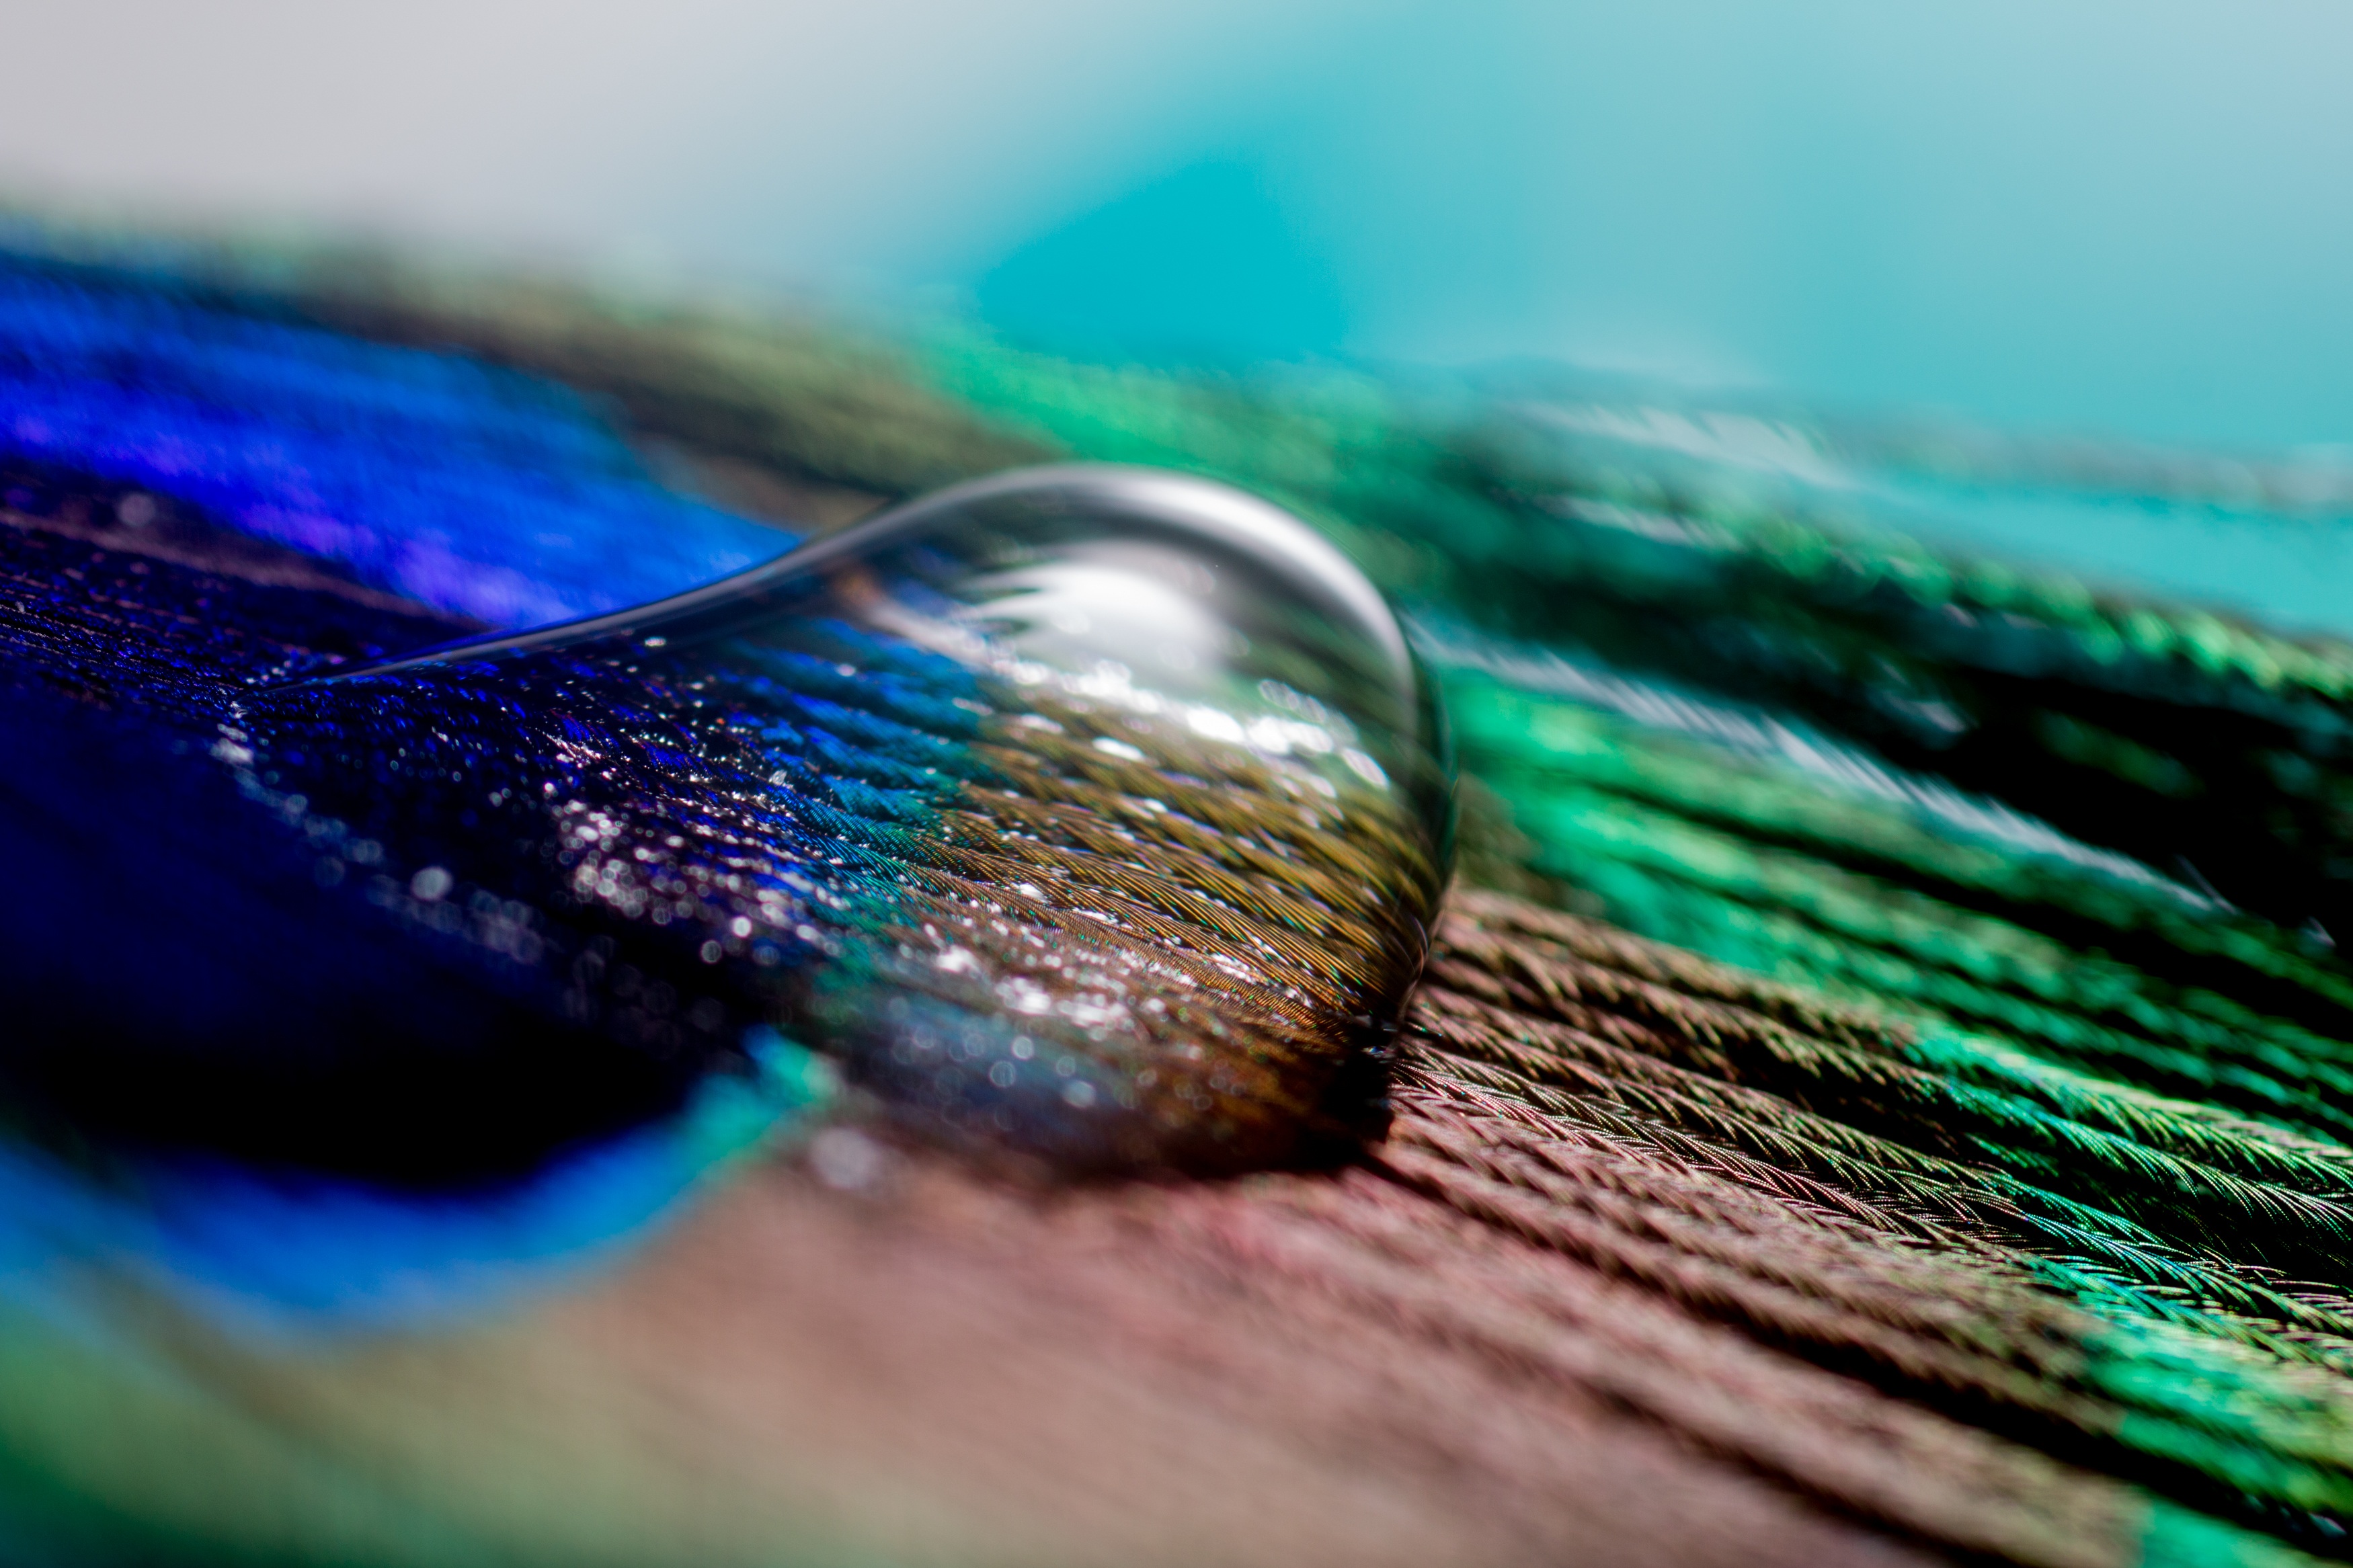 Water drop on the feather photo